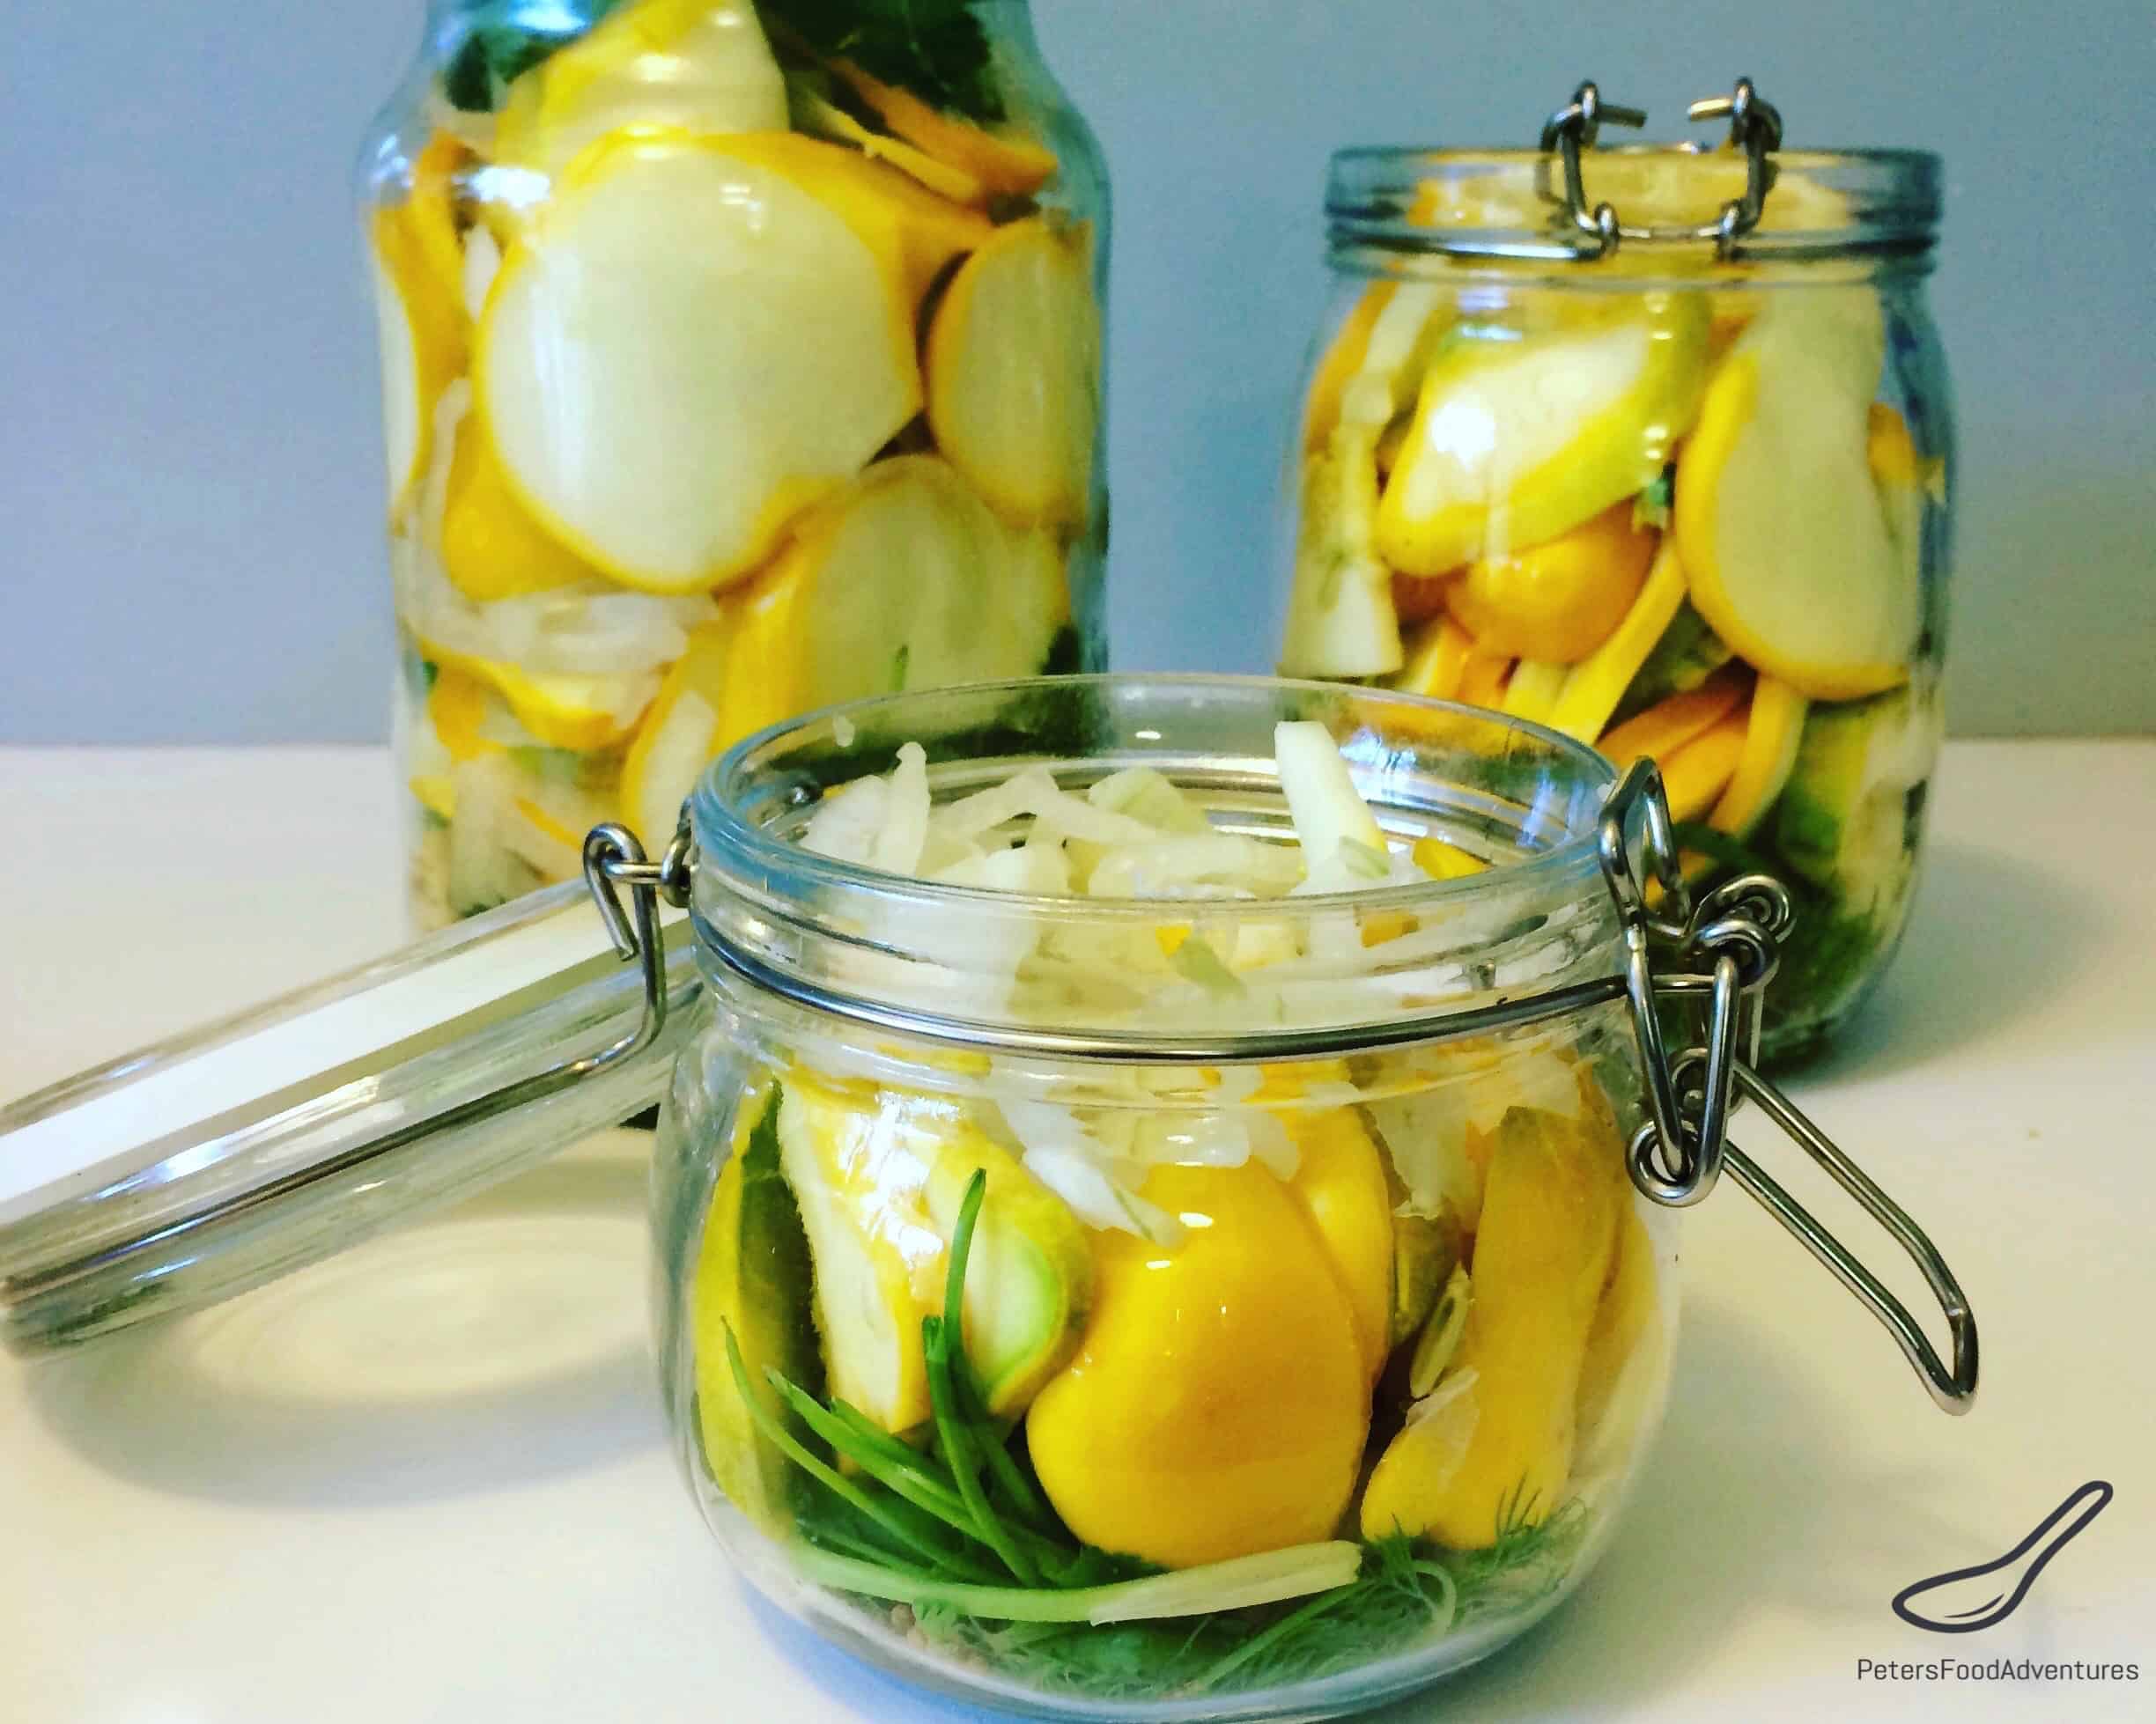 Quick Pickled Squash - A great way to preserve your pattypan vegetables through pickling without canning. These are so good! Throw a few on a hamburger, Perfect condiment for bbq season this summer!